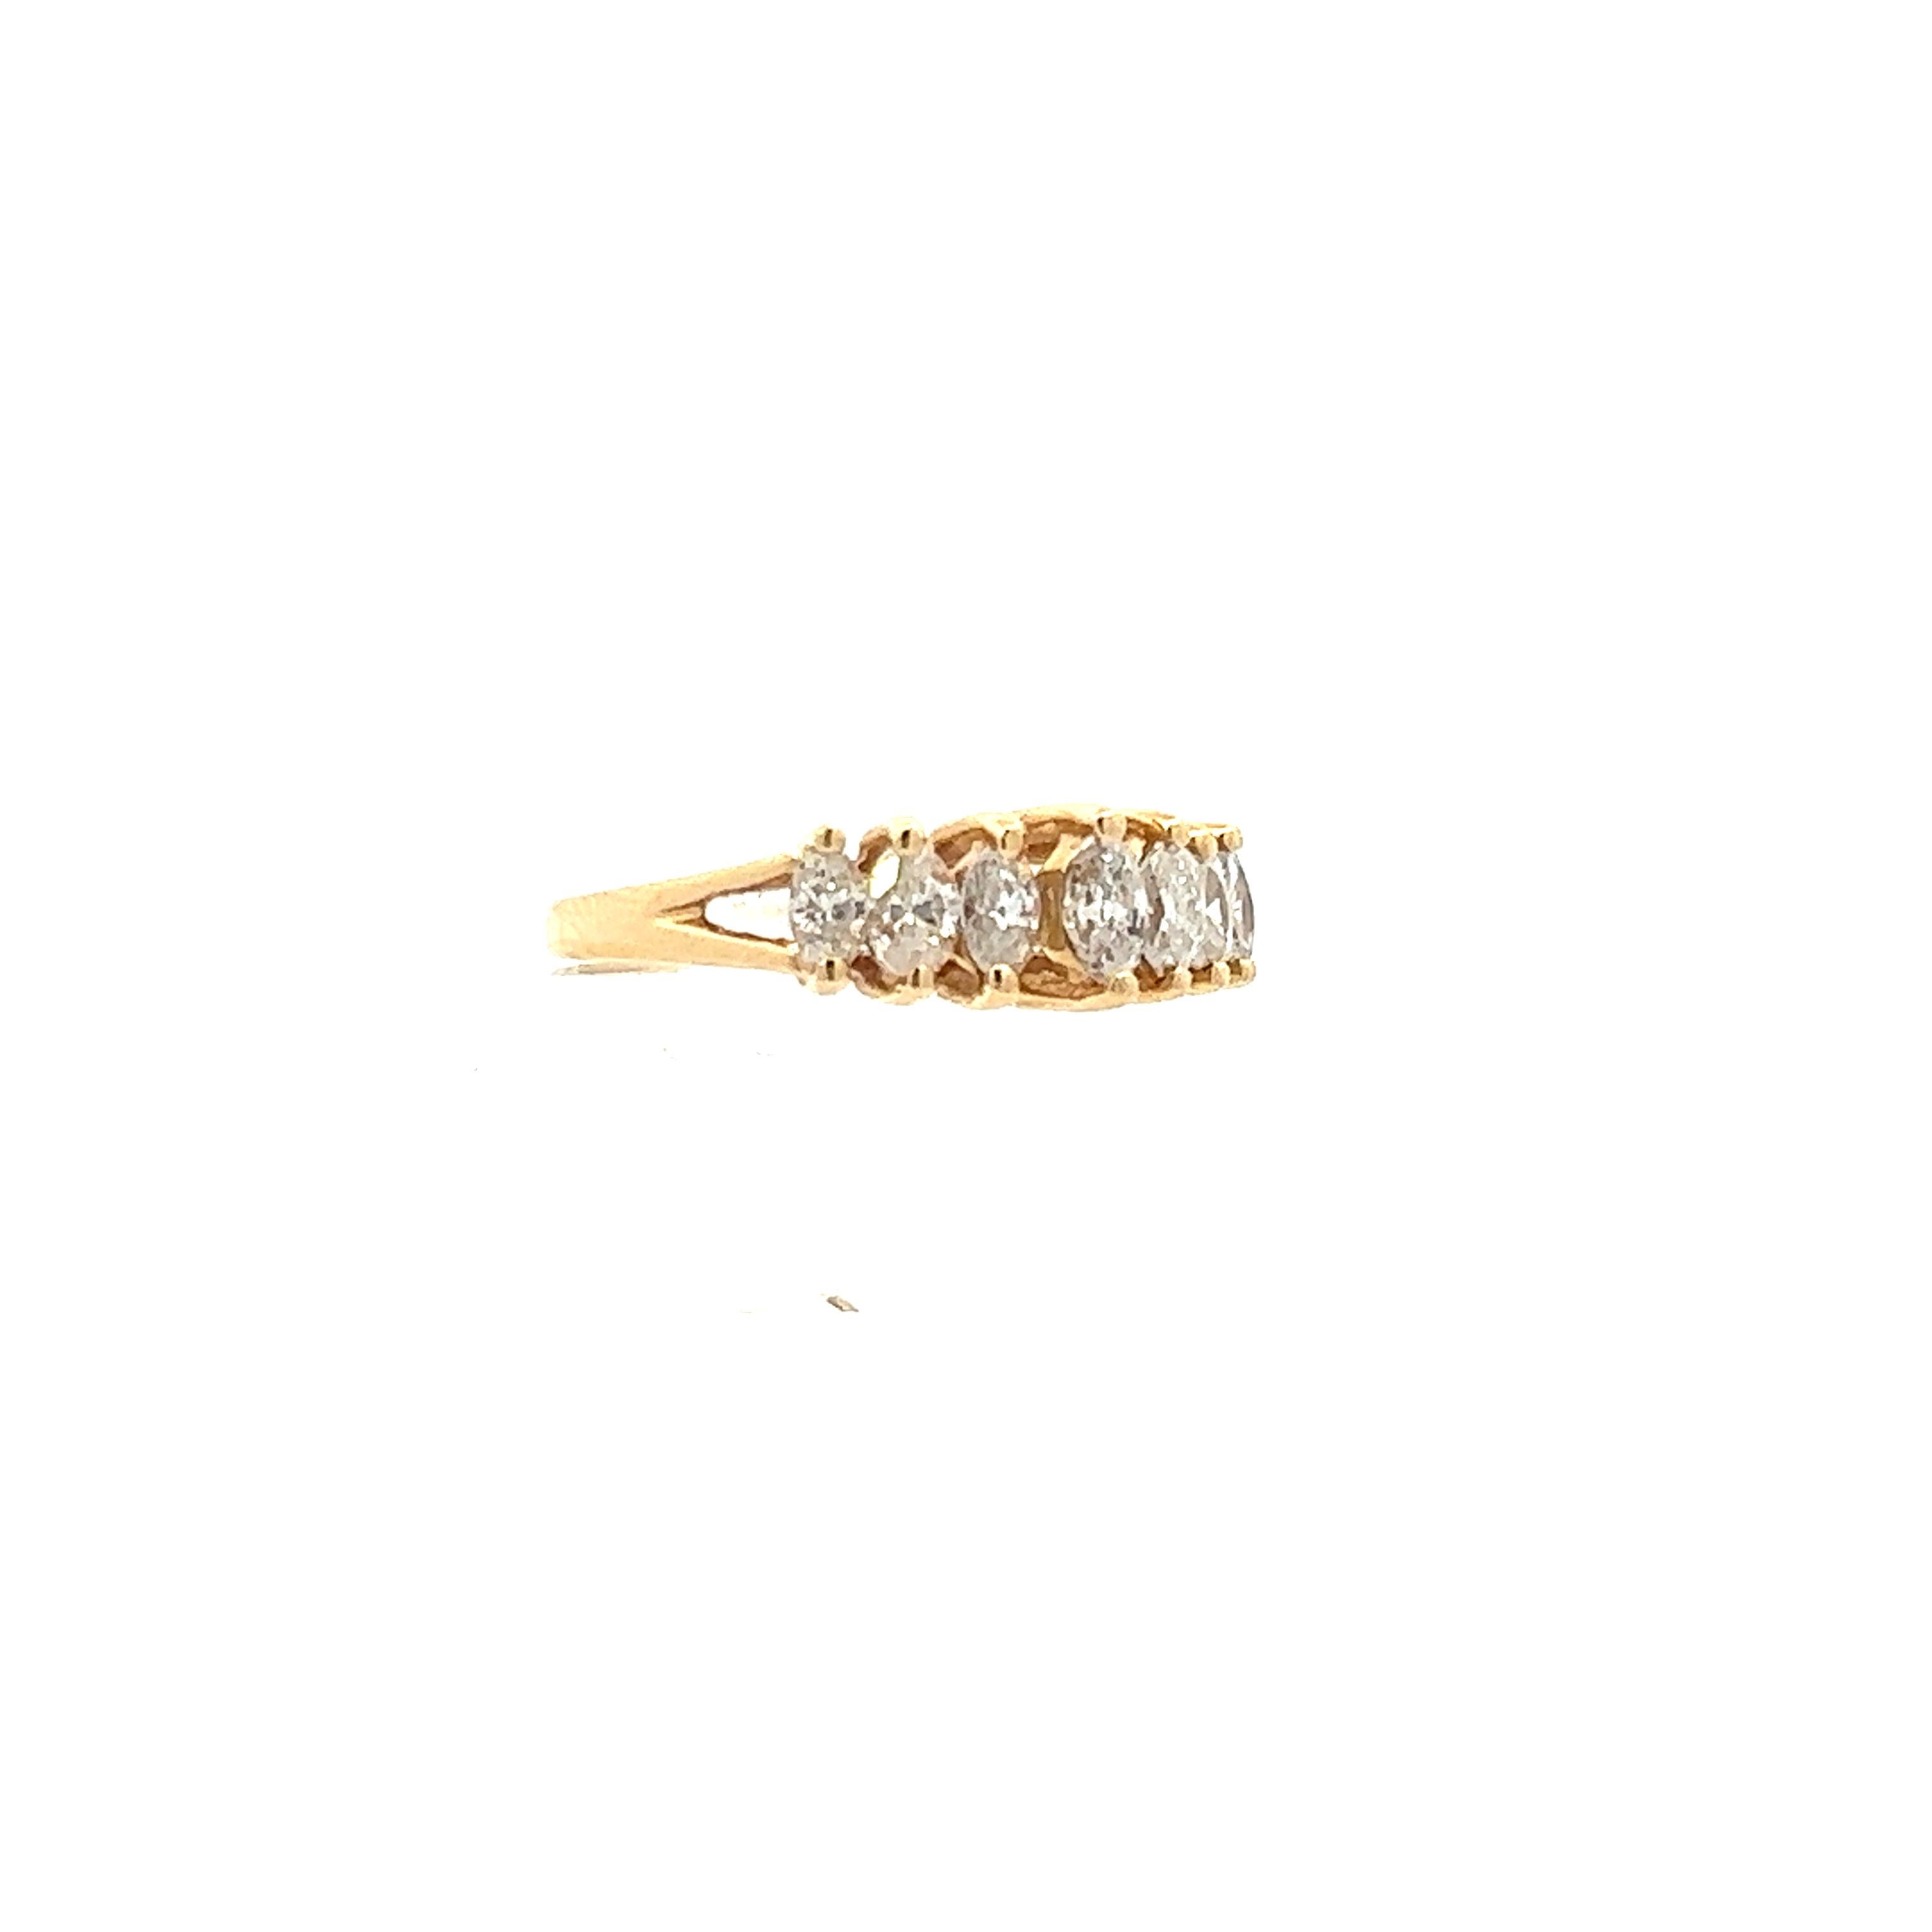 This stunning contemporary ring is made in 14k yellow gold and features marquise diamonds. The design of this 14k yellow gold ring is unique as there are 7 total marquise diamonds in a raised setting, with negative space between each, allowing for